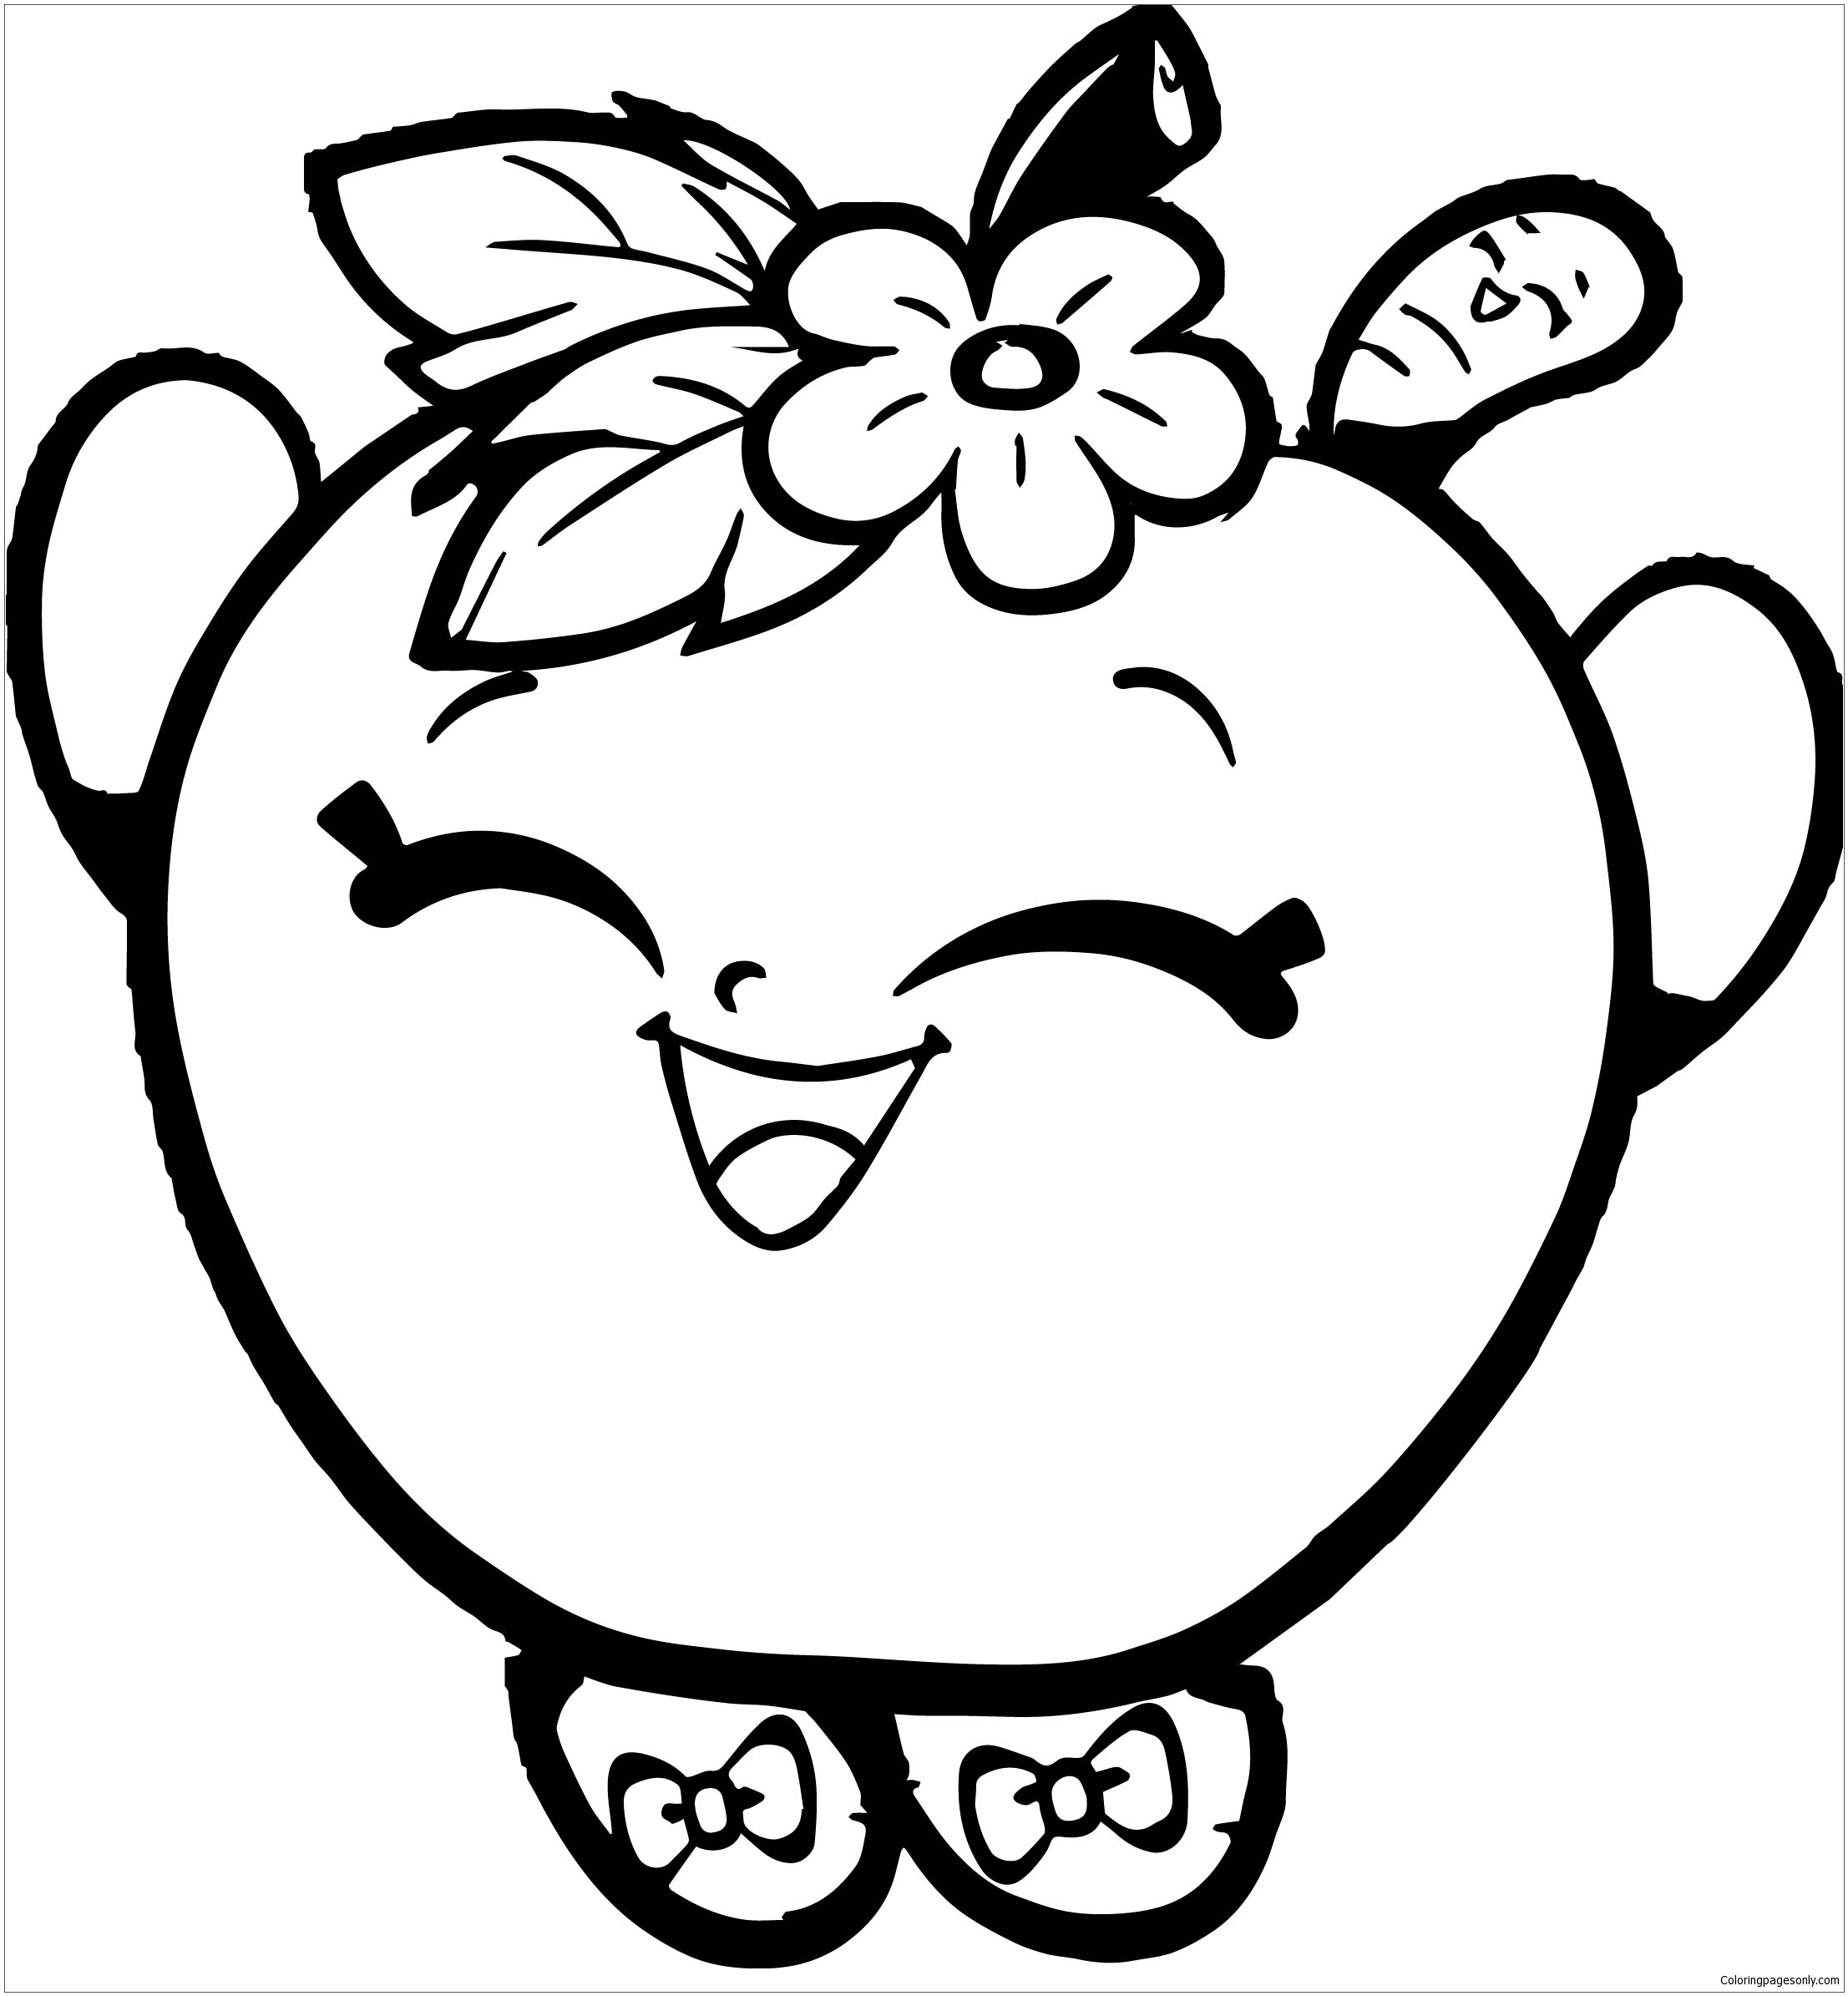 Download Girls Shopkins Apple Coloring Page - Free Coloring Pages ...